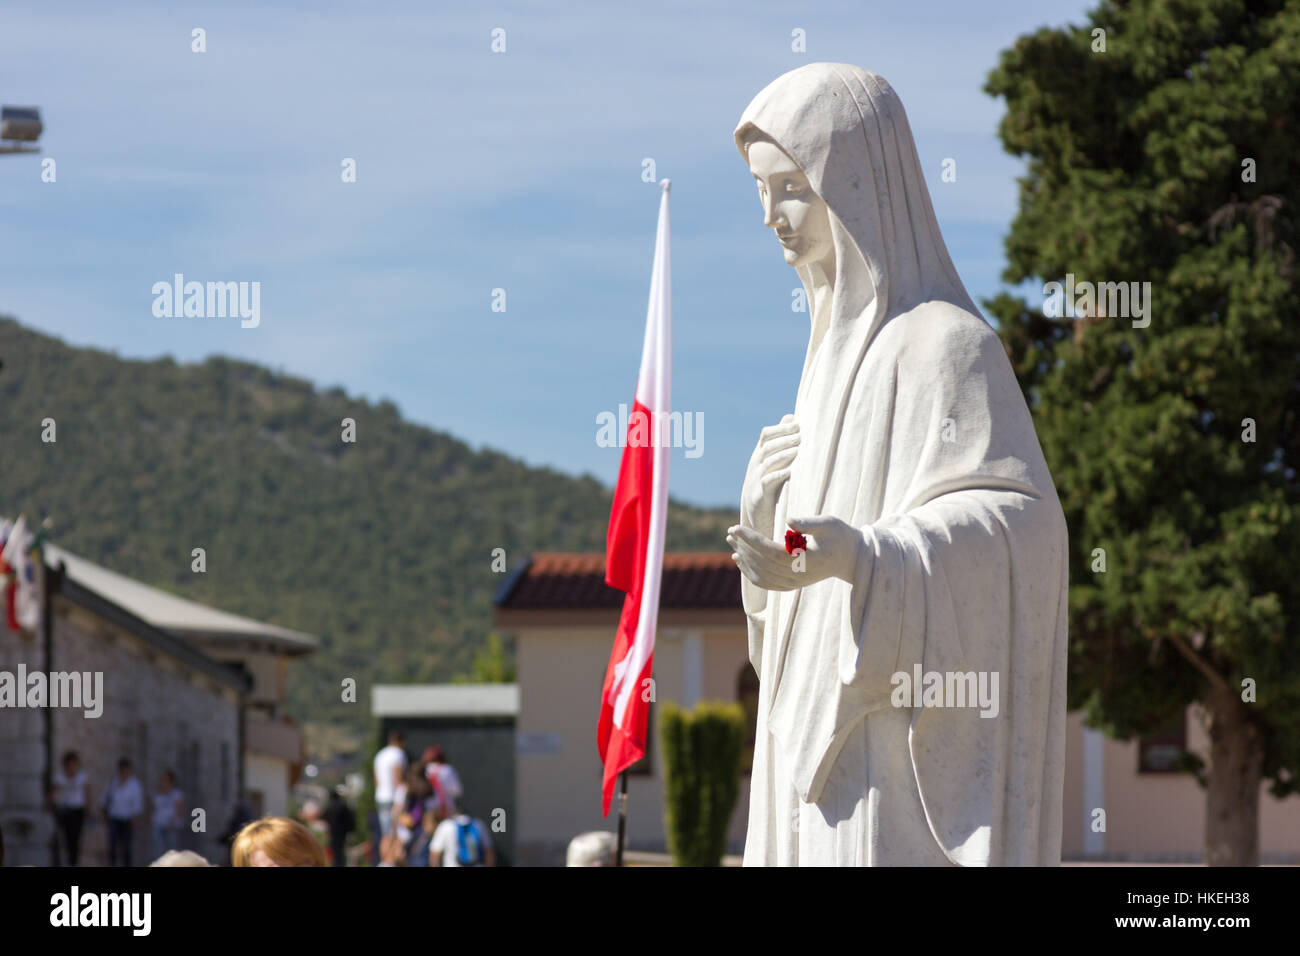 MEDJUGORJE, BOSNIA AND HERZEGOVINA, 2016/08/20. The statue of Virgin Mary in front of the church of Saint James. She is inviting her children to pray. Stock Photo